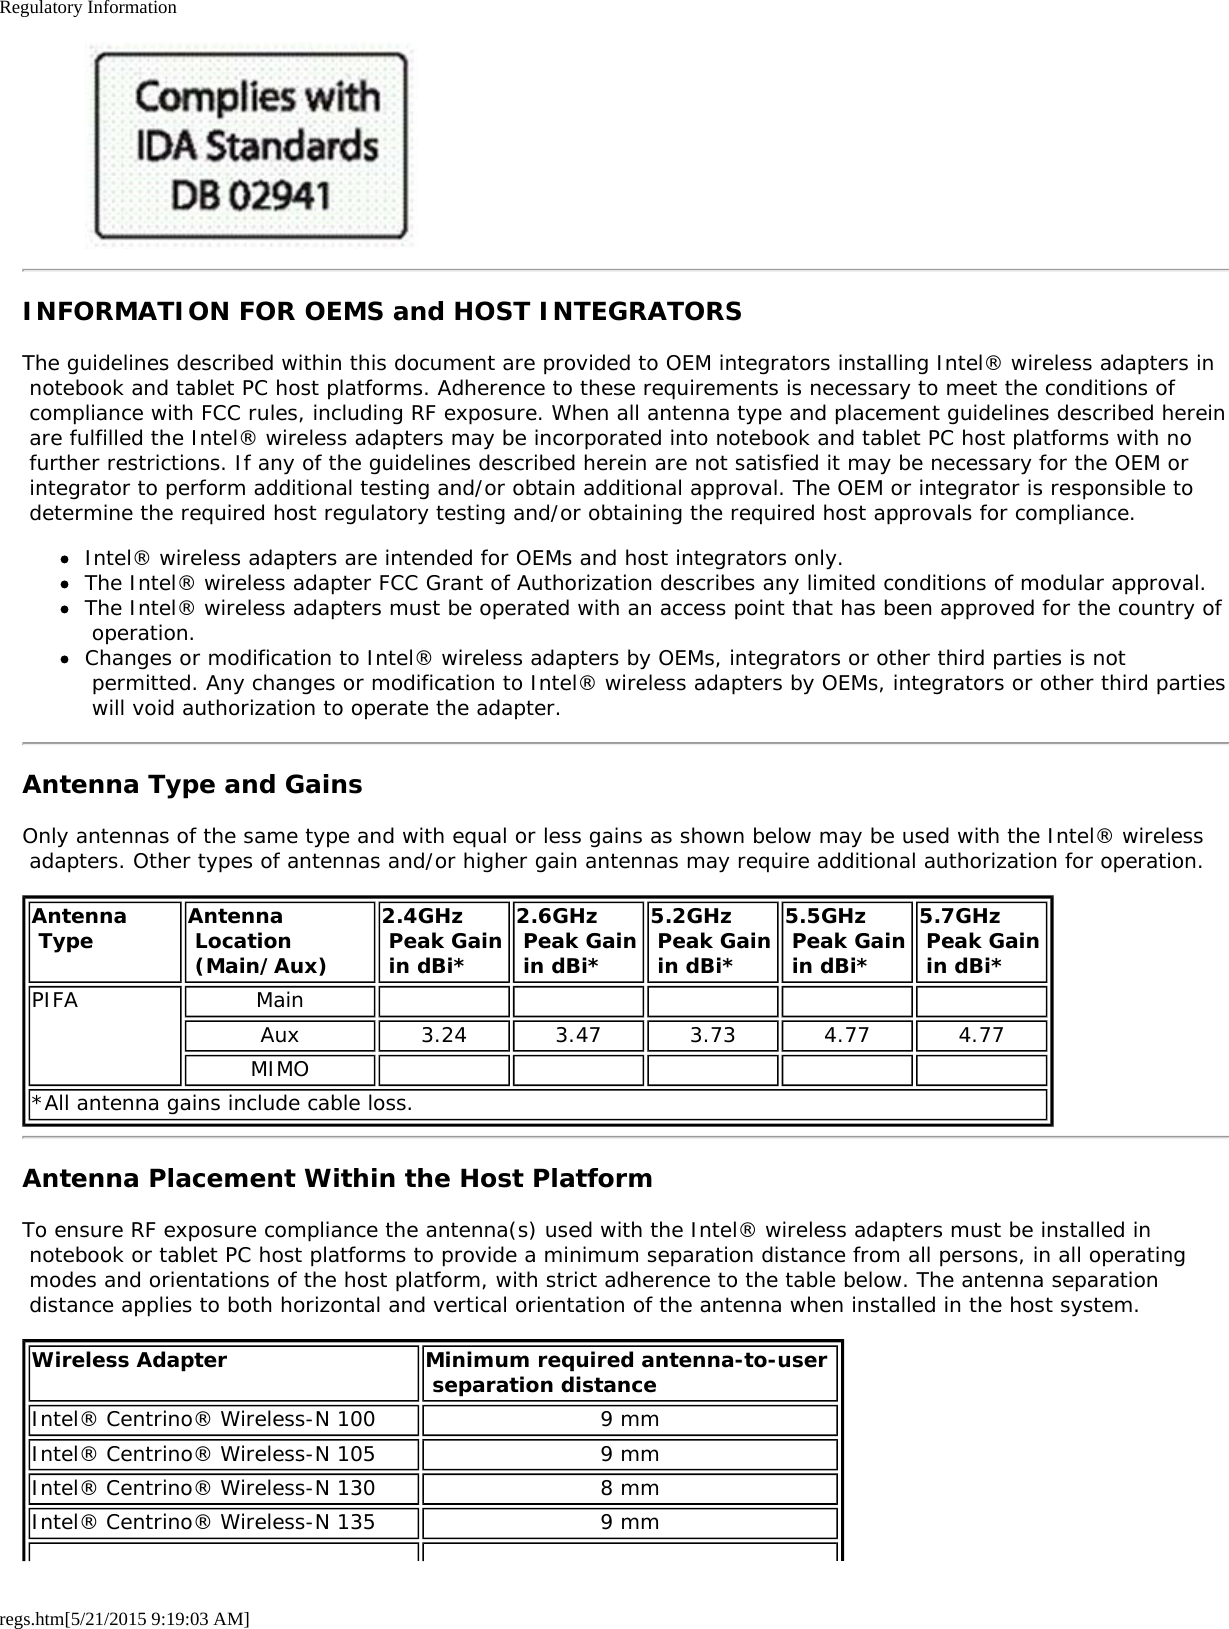 Regulatory Informationregs.htm[5/21/2015 9:19:03 AM]INFORMATION FOR OEMS and HOST INTEGRATORSThe guidelines described within this document are provided to OEM integrators installing Intel® wireless adapters in notebook and tablet PC host platforms. Adherence to these requirements is necessary to meet the conditions of compliance with FCC rules, including RF exposure. When all antenna type and placement guidelines described herein are fulfilled the Intel® wireless adapters may be incorporated into notebook and tablet PC host platforms with no further restrictions. If any of the guidelines described herein are not satisfied it may be necessary for the OEM or integrator to perform additional testing and/or obtain additional approval. The OEM or integrator is responsible to determine the required host regulatory testing and/or obtaining the required host approvals for compliance.Intel® wireless adapters are intended for OEMs and host integrators only.The Intel® wireless adapter FCC Grant of Authorization describes any limited conditions of modular approval.The Intel® wireless adapters must be operated with an access point that has been approved for the country of operation.Changes or modification to Intel® wireless adapters by OEMs, integrators or other third parties is not permitted. Any changes or modification to Intel® wireless adapters by OEMs, integrators or other third parties will void authorization to operate the adapter.Antenna Type and GainsOnly antennas of the same type and with equal or less gains as shown below may be used with the Intel® wireless adapters. Other types of antennas and/or higher gain antennas may require additional authorization for operation.Antenna Type Antenna Location (Main/Aux)2.4GHz Peak Gain in dBi*2.6GHz Peak Gain in dBi*5.2GHz Peak Gain in dBi*5.5GHz Peak Gain in dBi*5.7GHz  Peak Gain in dBi*PIFA MainAux 3.24 3.47 3.73 4.77 4.77MIMO*All antenna gains include cable loss.Antenna Placement Within the Host PlatformTo ensure RF exposure compliance the antenna(s) used with the Intel® wireless adapters must be installed in notebook or tablet PC host platforms to provide a minimum separation distance from all persons, in all operating modes and orientations of the host platform, with strict adherence to the table below. The antenna separation distance applies to both horizontal and vertical orientation of the antenna when installed in the host system.Wireless Adapter Minimum required antenna-to-user  separation distanceIntel® Centrino® Wireless-N 100 9 mmIntel® Centrino® Wireless-N 105 9 mmIntel® Centrino® Wireless-N 130 8 mmIntel® Centrino® Wireless-N 135 9 mm